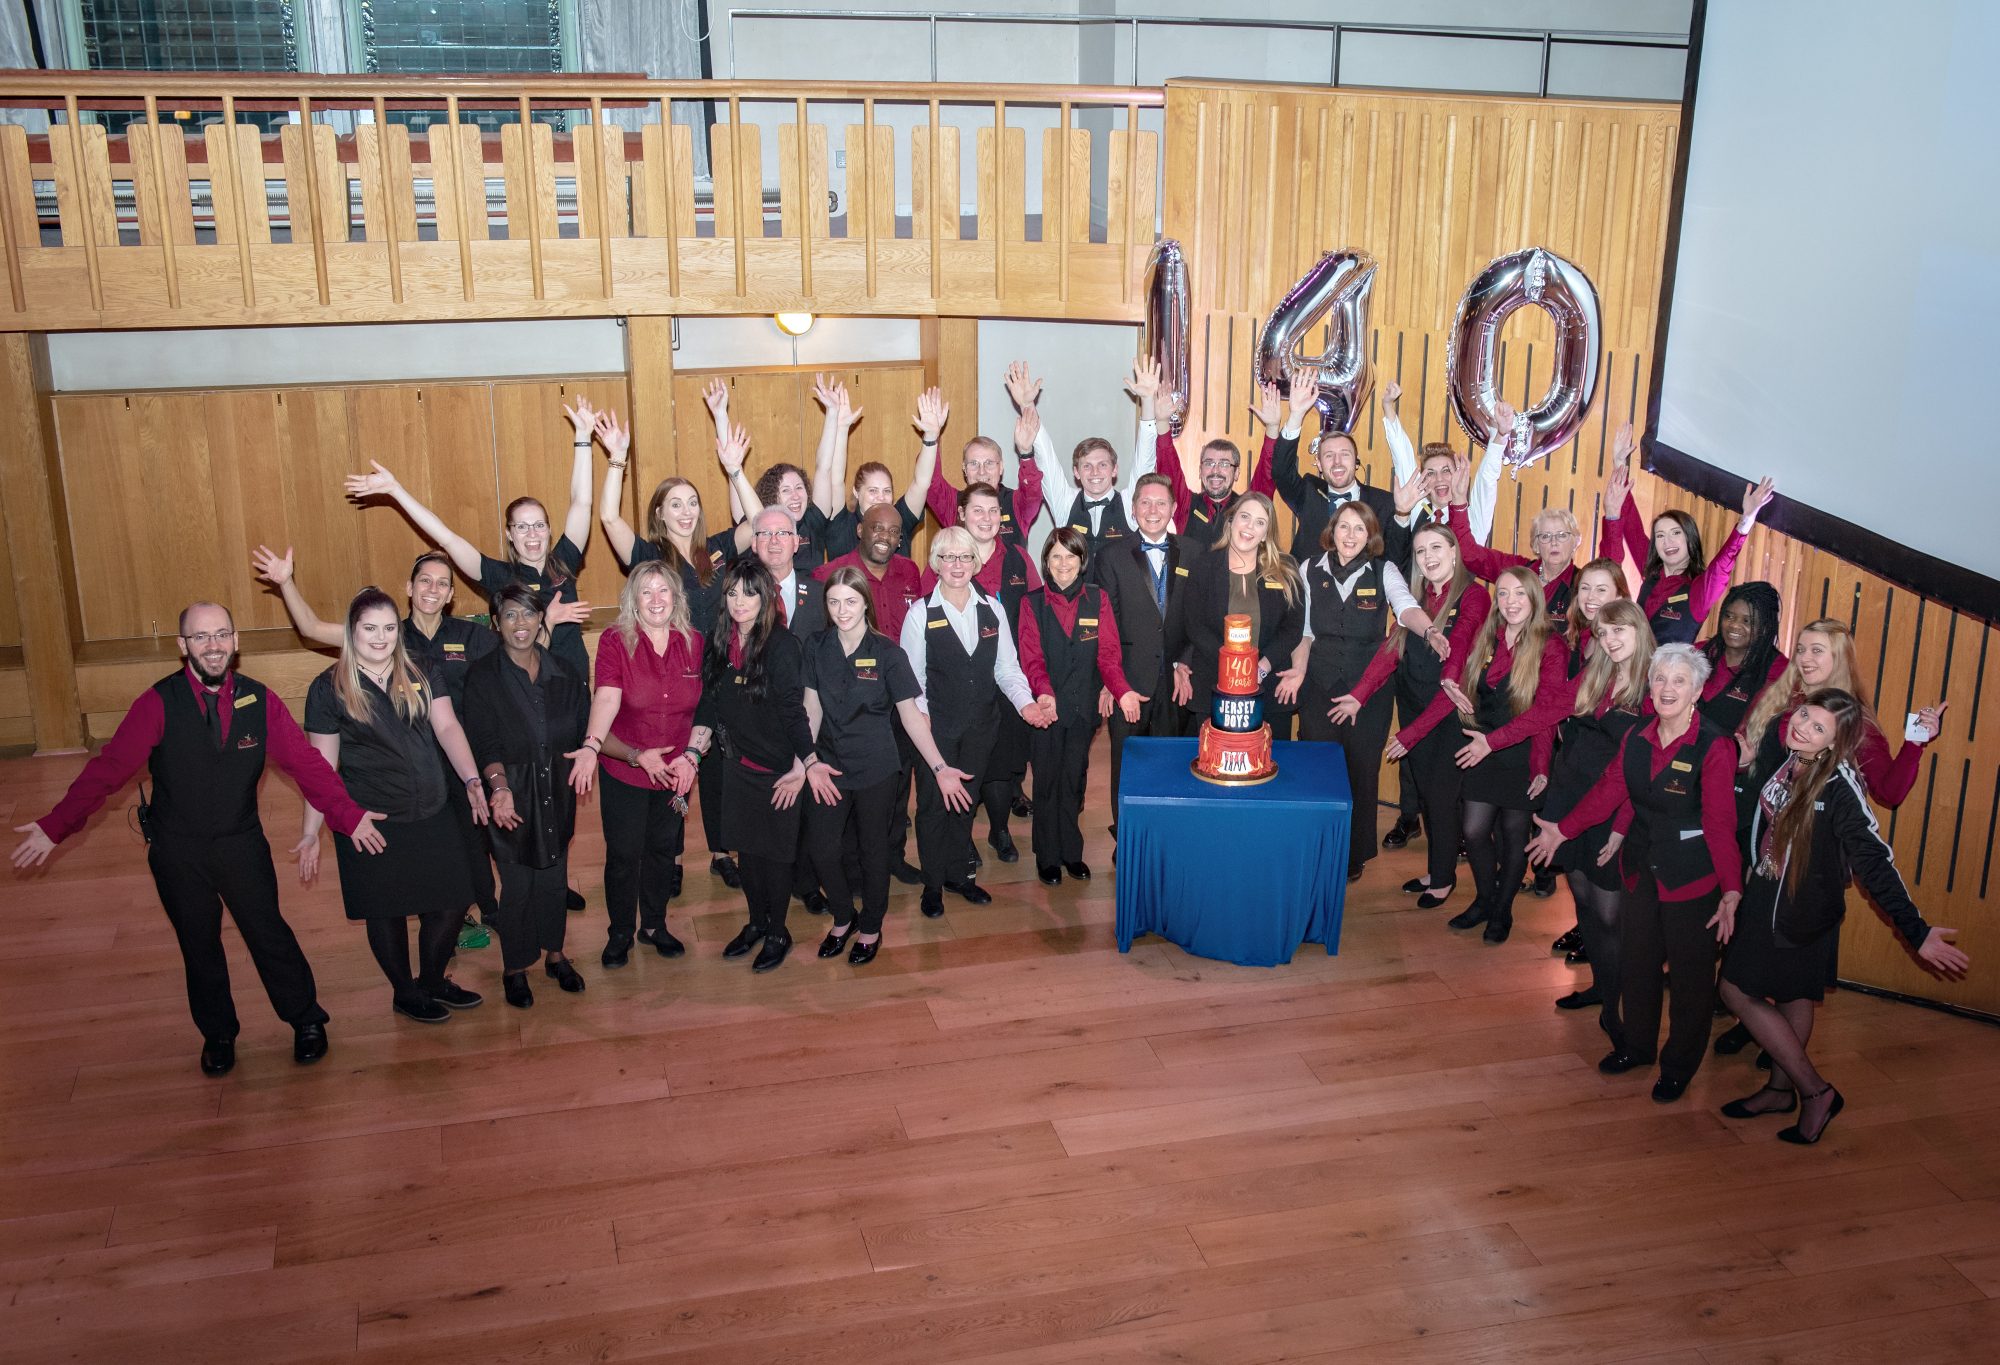 A group of Leeds Grand Theatre staff celebrating the 140th birthday with a Jersey Boys themed cake and giant 140 balloons.